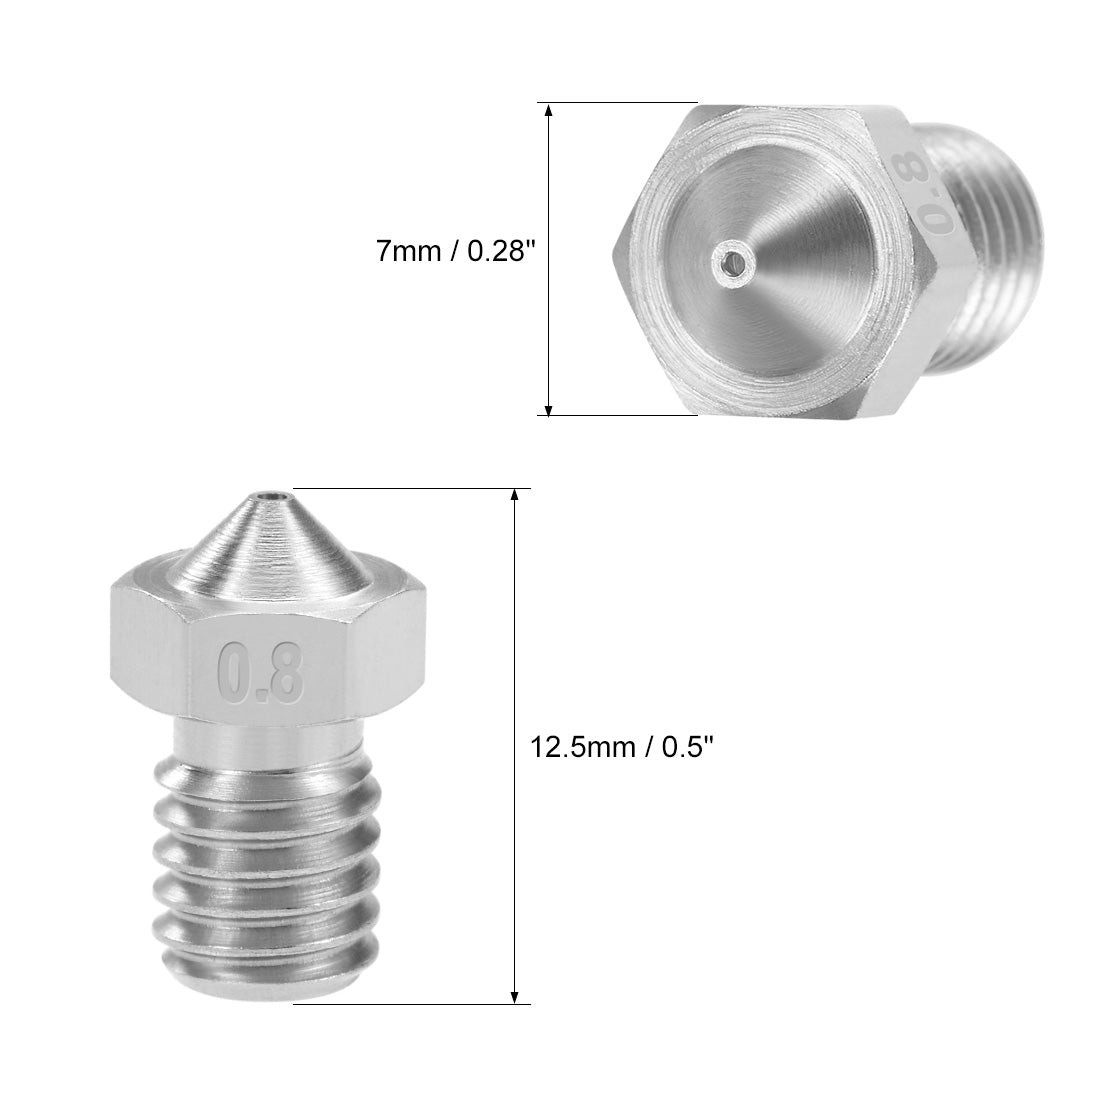 uxcell Uxcell 0.8mm 3D Printer Nozzle Head M6 Thread Replacement for V5 V6 3mm Extruder Print, Stainless Steel 2pcs